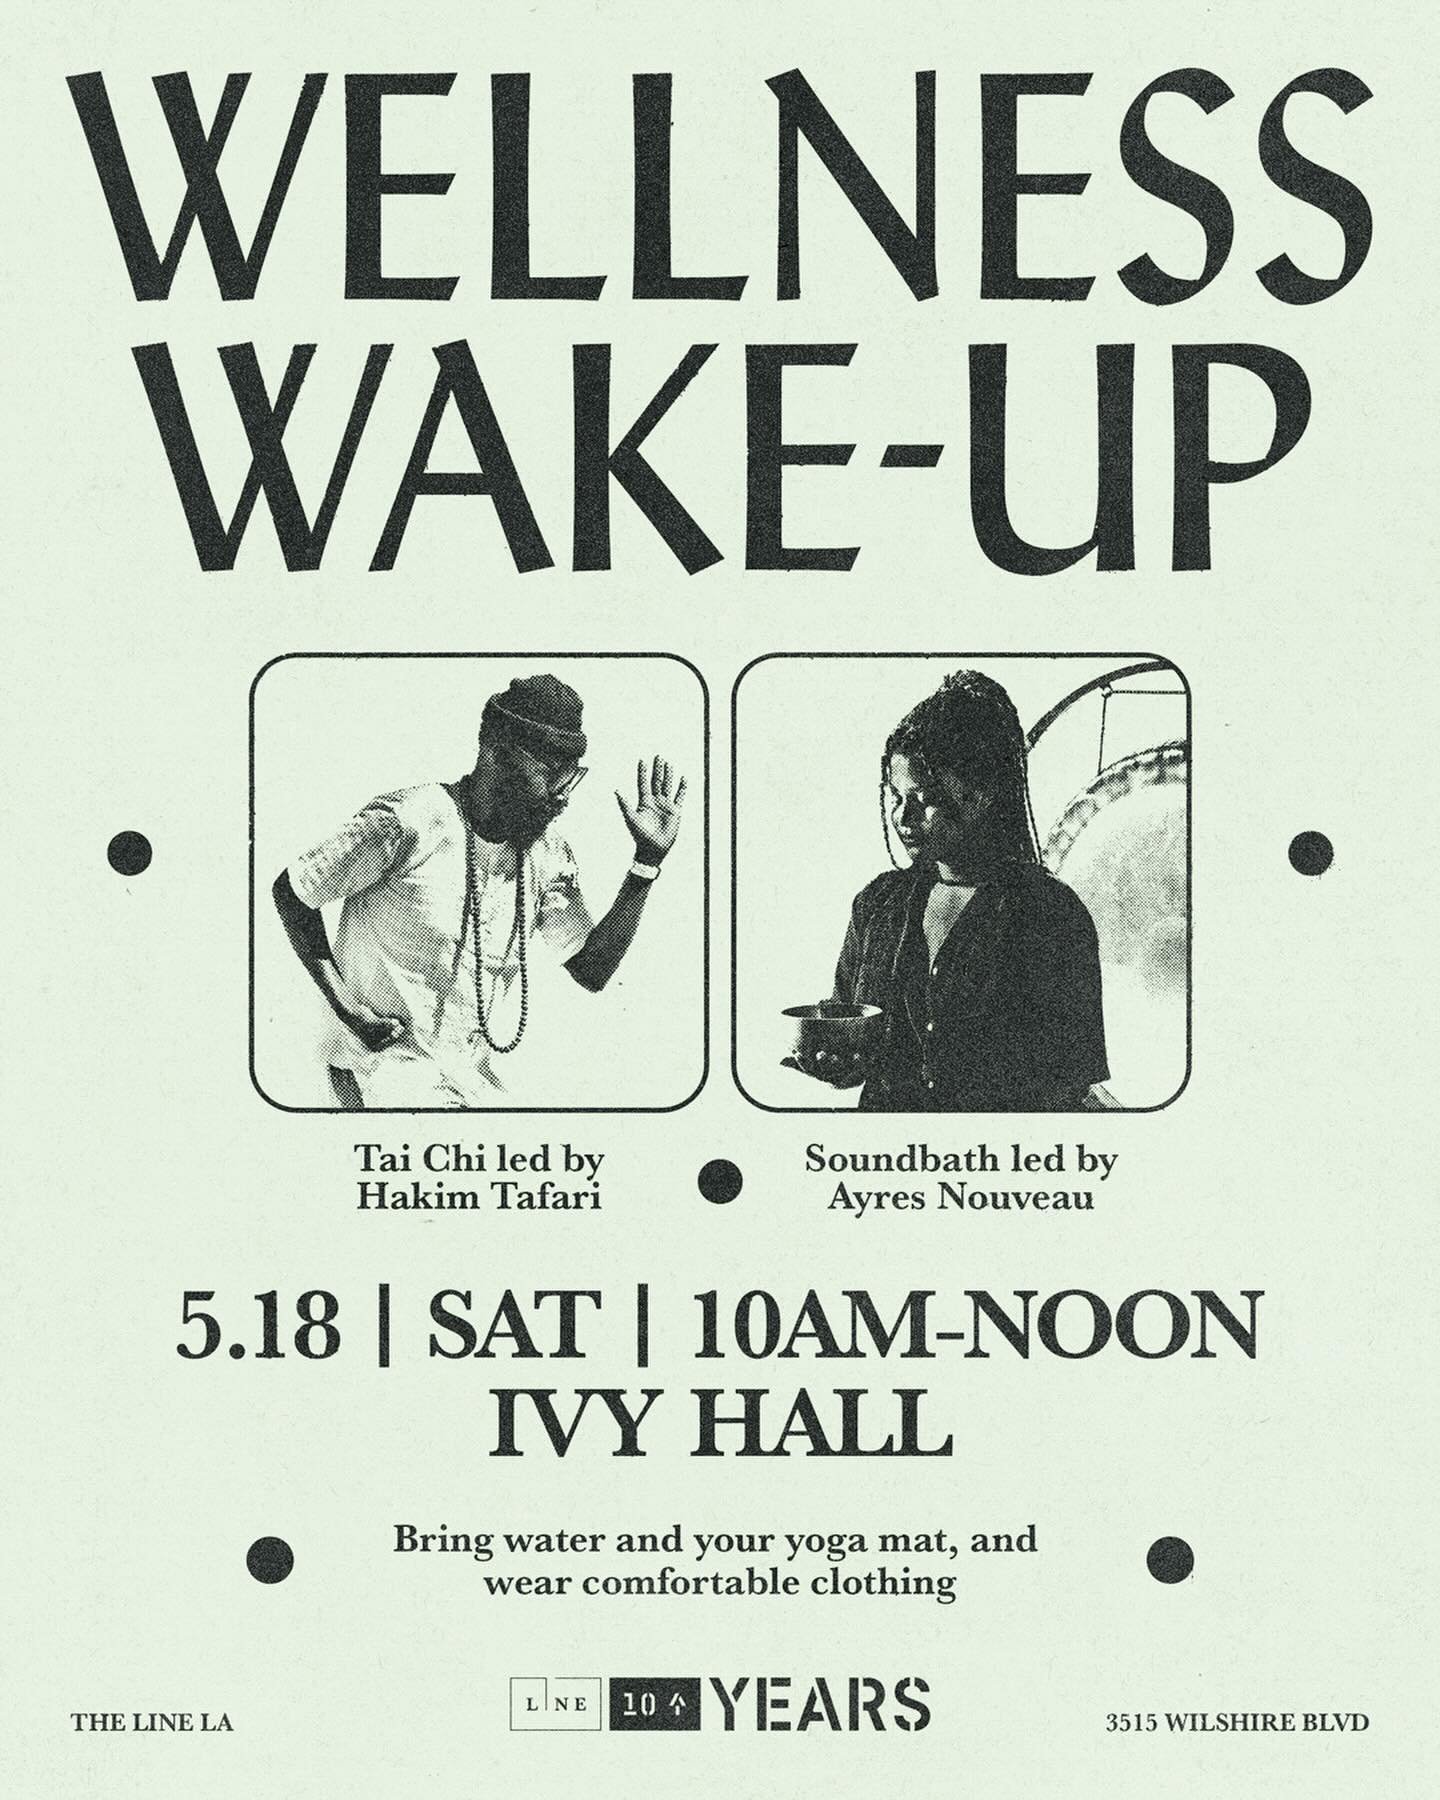 Start your weekend with us tomorrow morning as we celebrate 10 years of @thelinehotel with Tai Chi + Sound Healing joined by @hakstao 🌀 

Then I&rsquo;ll be back Tuesday with my monthly residency offering a Lunar Yoga &amp; Soundbath experience with